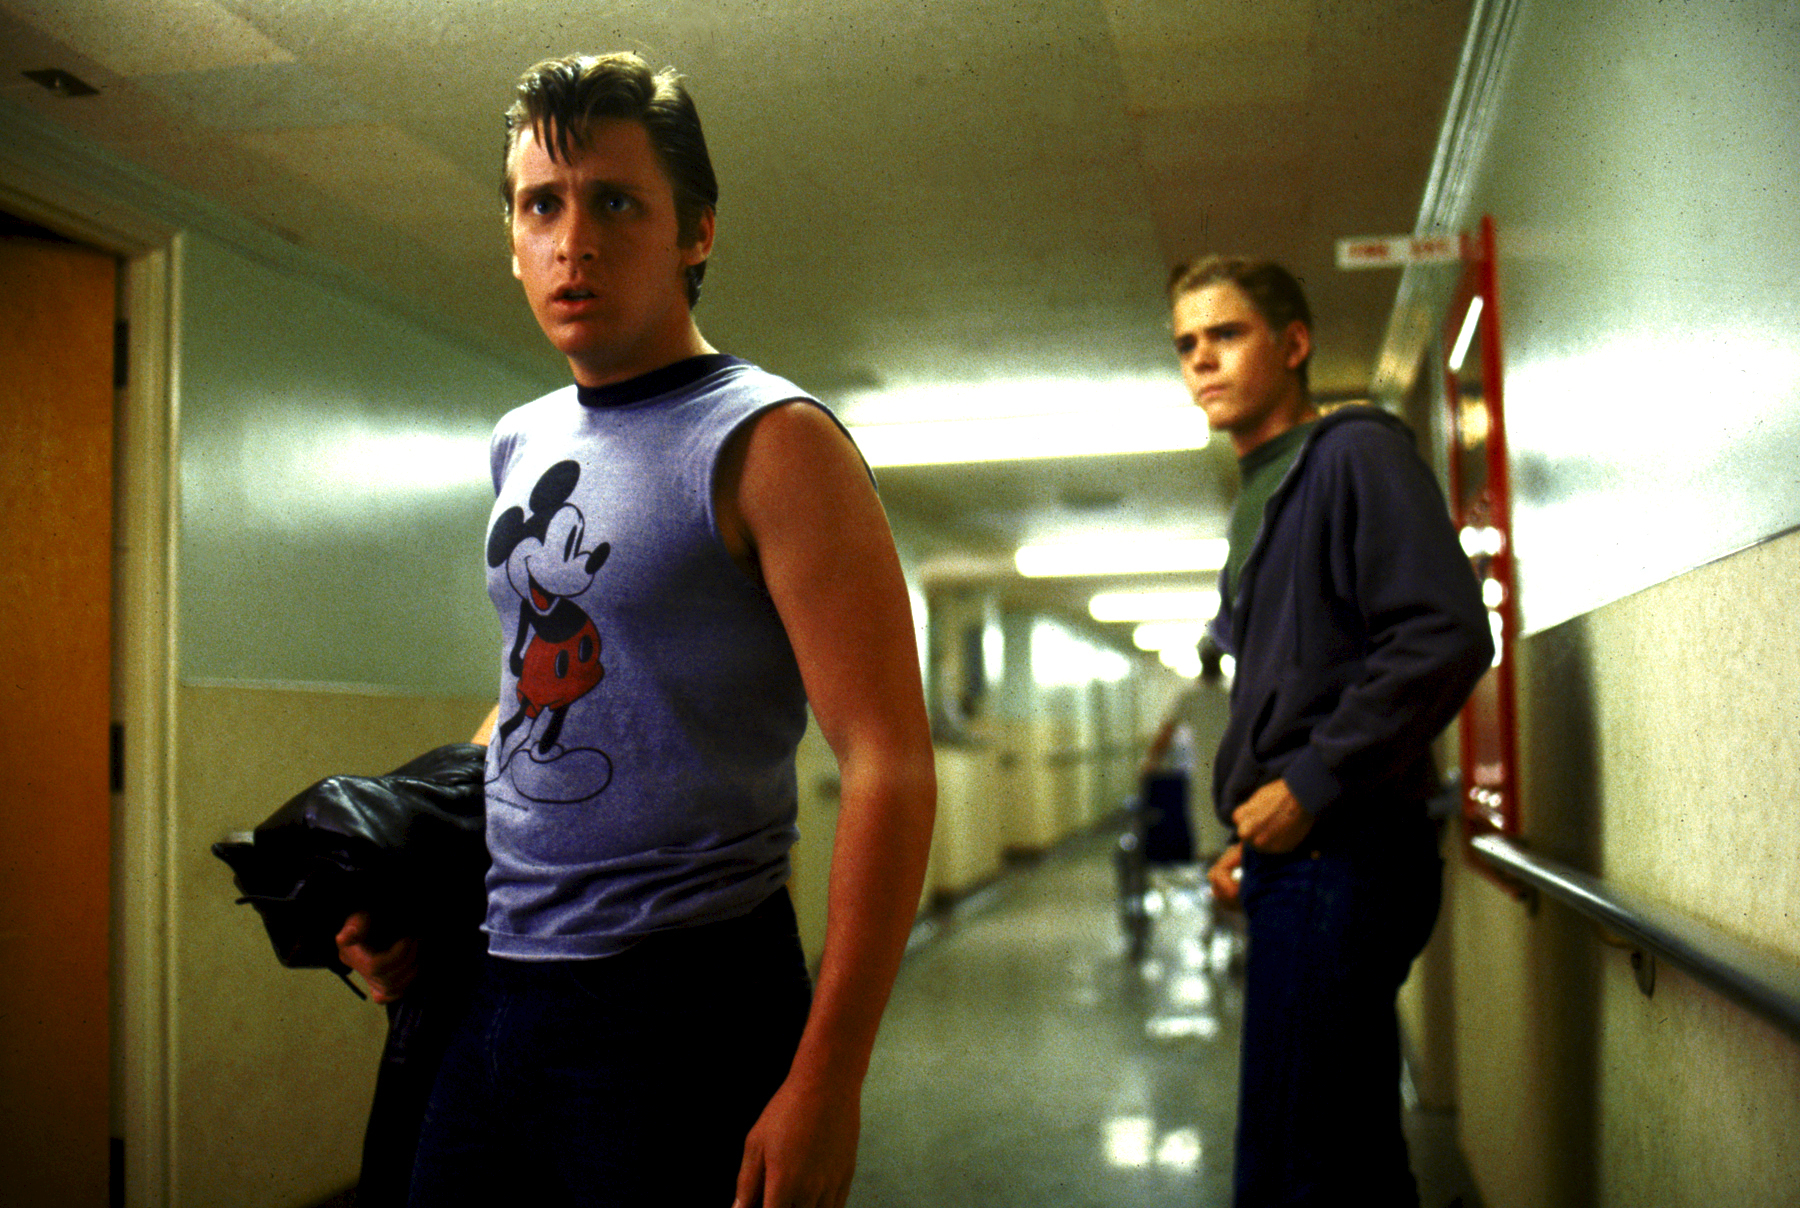 Still of Emilio Estevez and C. Thomas Howell in The Outsiders (1983)